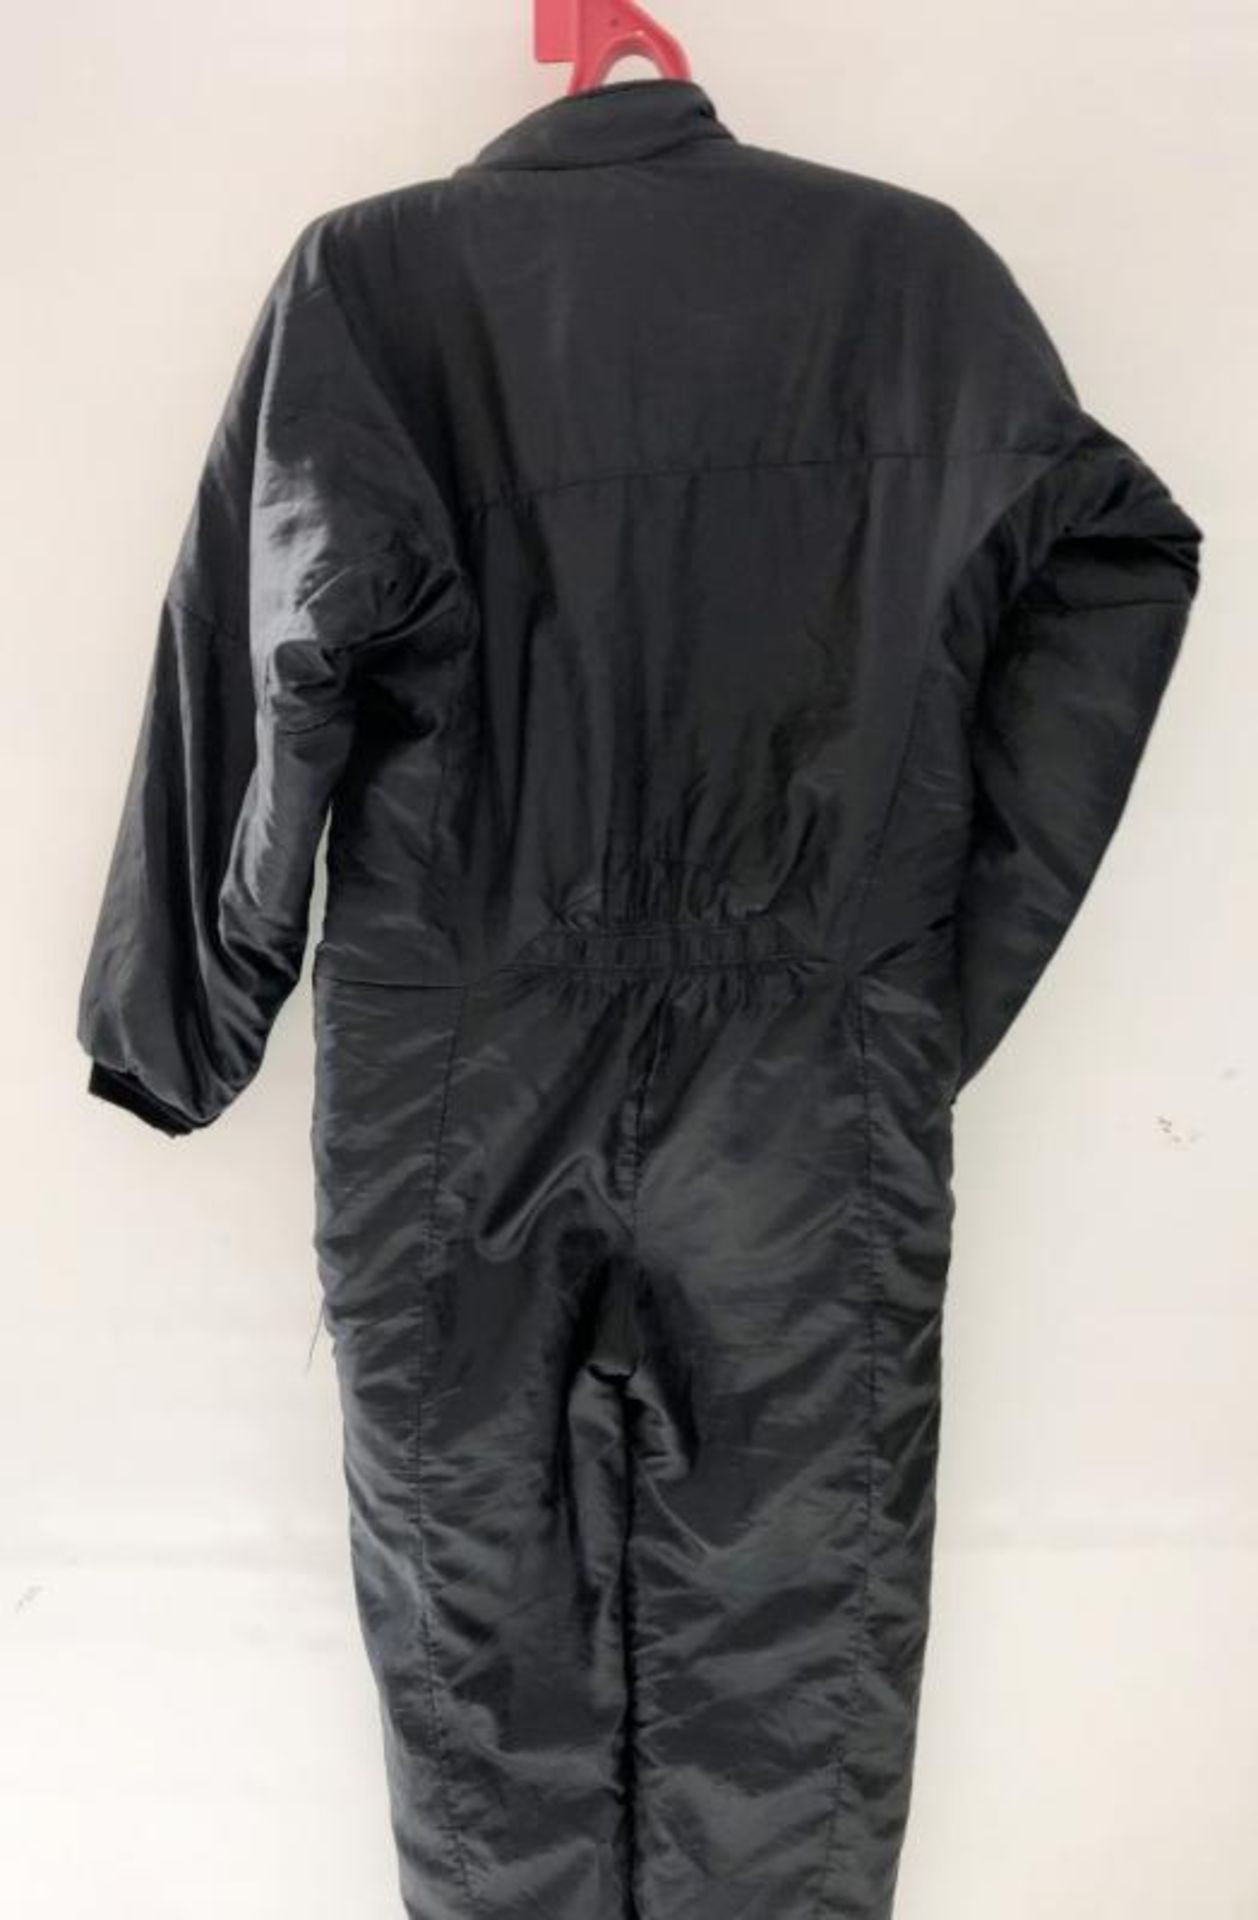 1 x Adults Small Black Typhoon Wetsuit - Ref: NS472 - CL349 - Location: Altrincham WA14 - Image 2 of 5